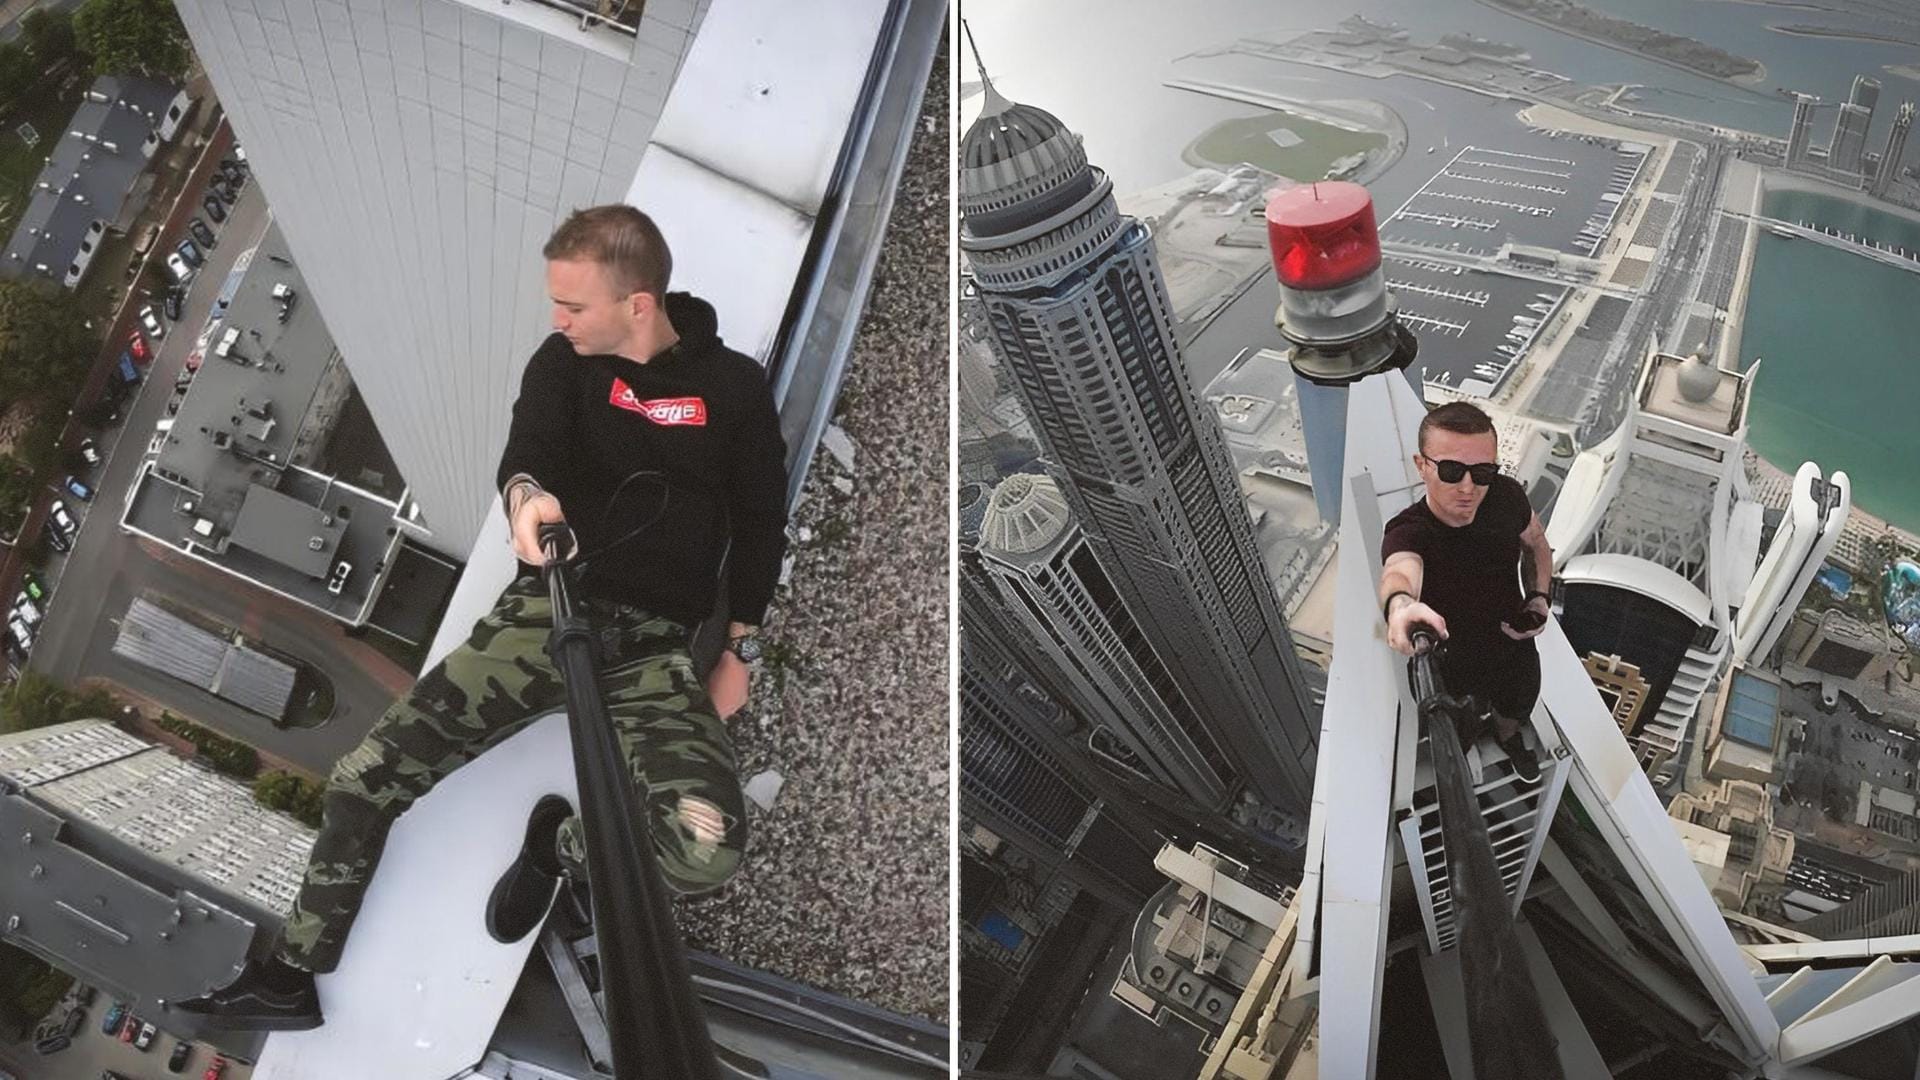 Hong Kong: French daredevil dies after falling from 68th floor